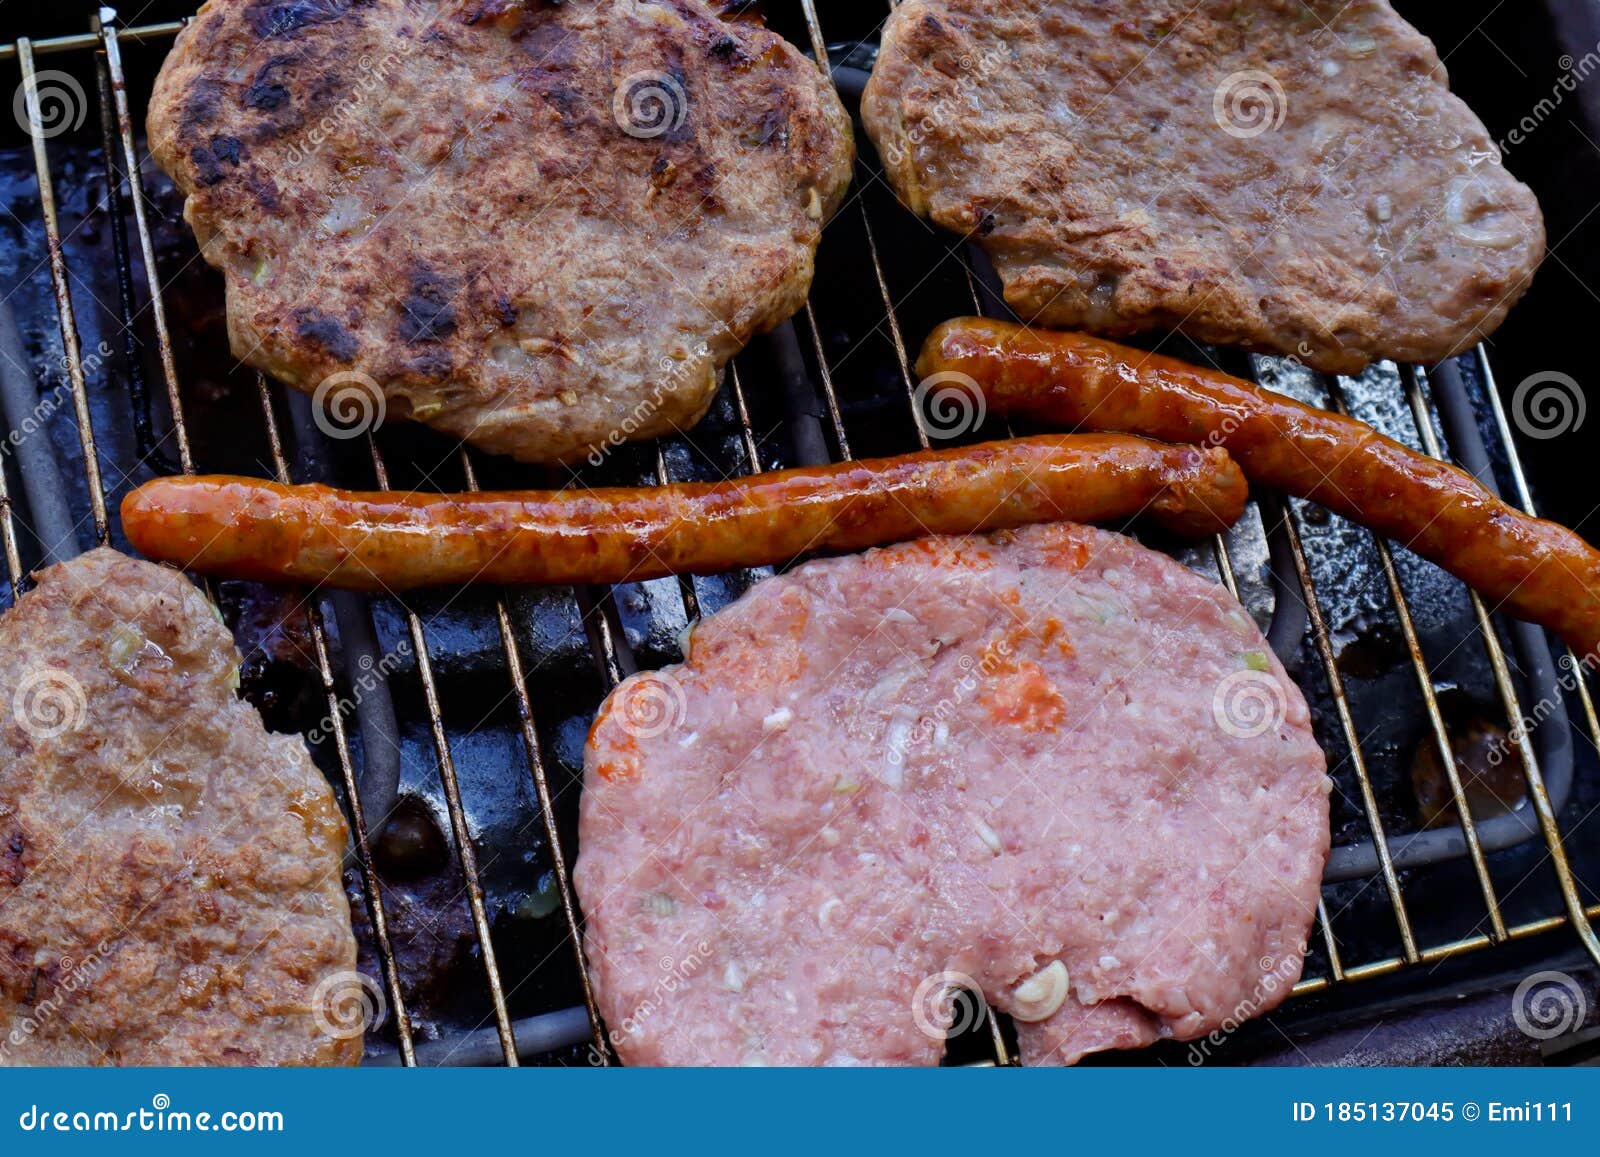 traditional serbian barbecue rostilj  homemade sausages and burgers. preparing a barbecue on a grill, outdoor roasting meat. tra